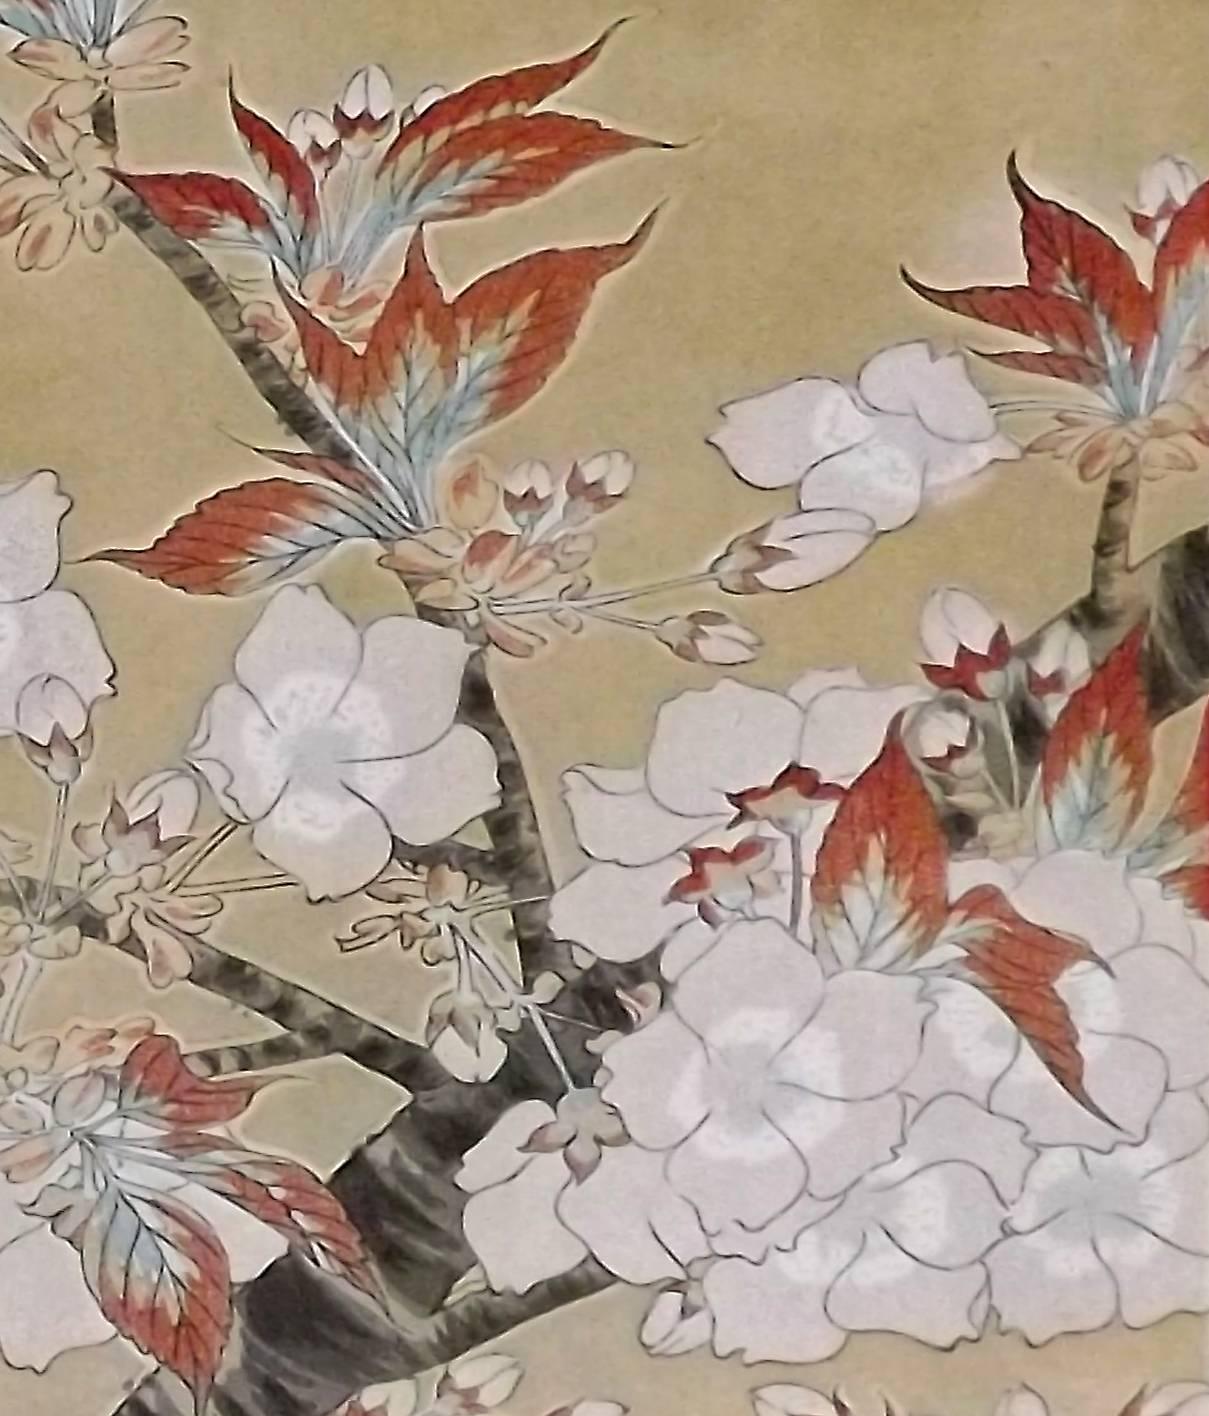 A charming woodblock print of cherry blossoms by Japanese artist Kawarazaki Shodo (1889-1973). Unframed, image size is 14 1/2 inches tall by 9 1/2 inches wide.